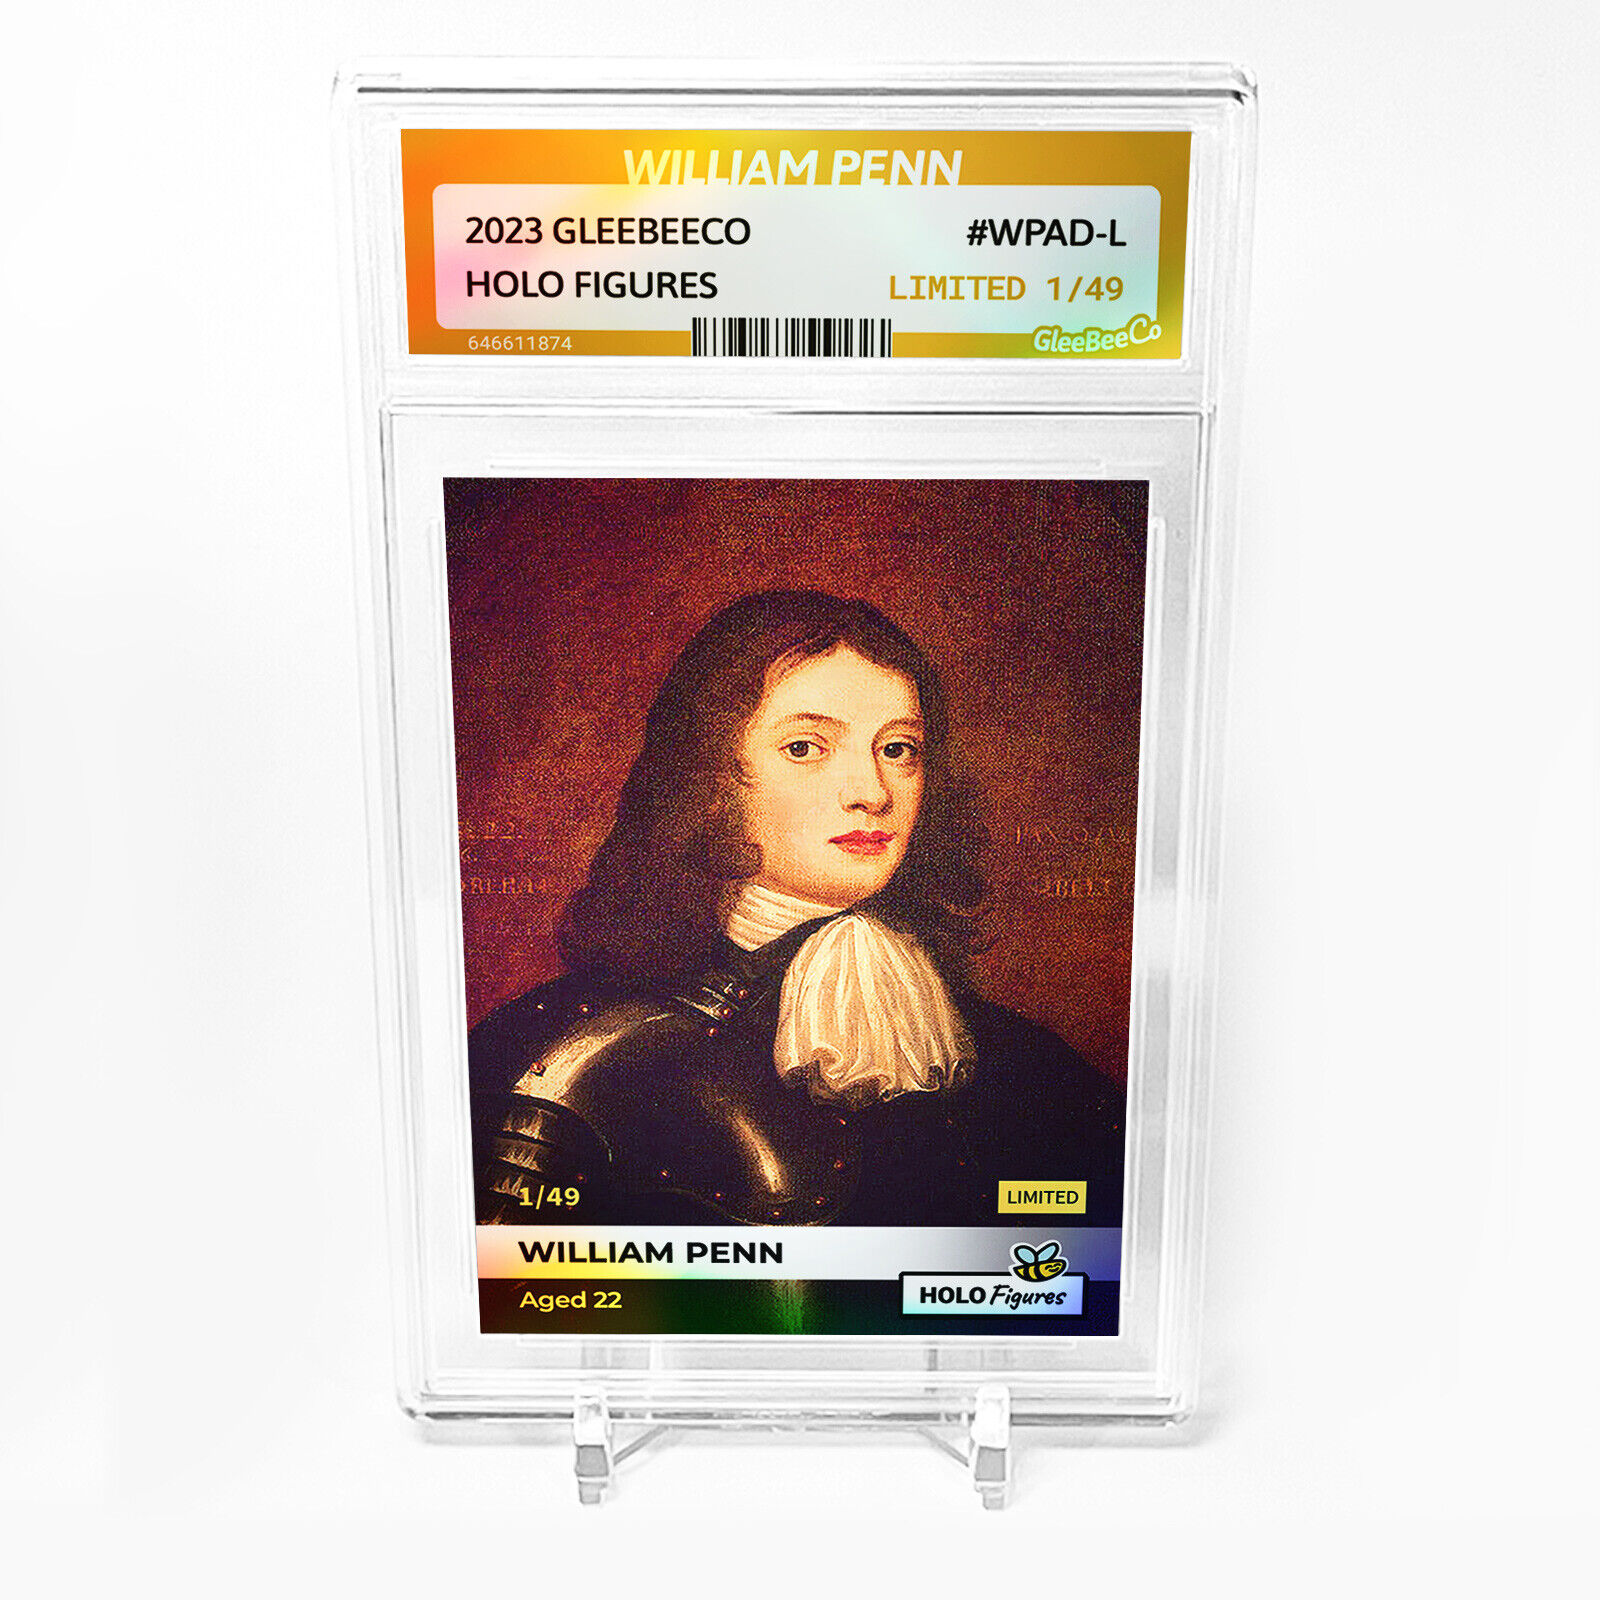 WILLIAM PENN Holographic Card 2023 GleeBeeCo Slabbed #WPAD-L Only /49 AWESOME